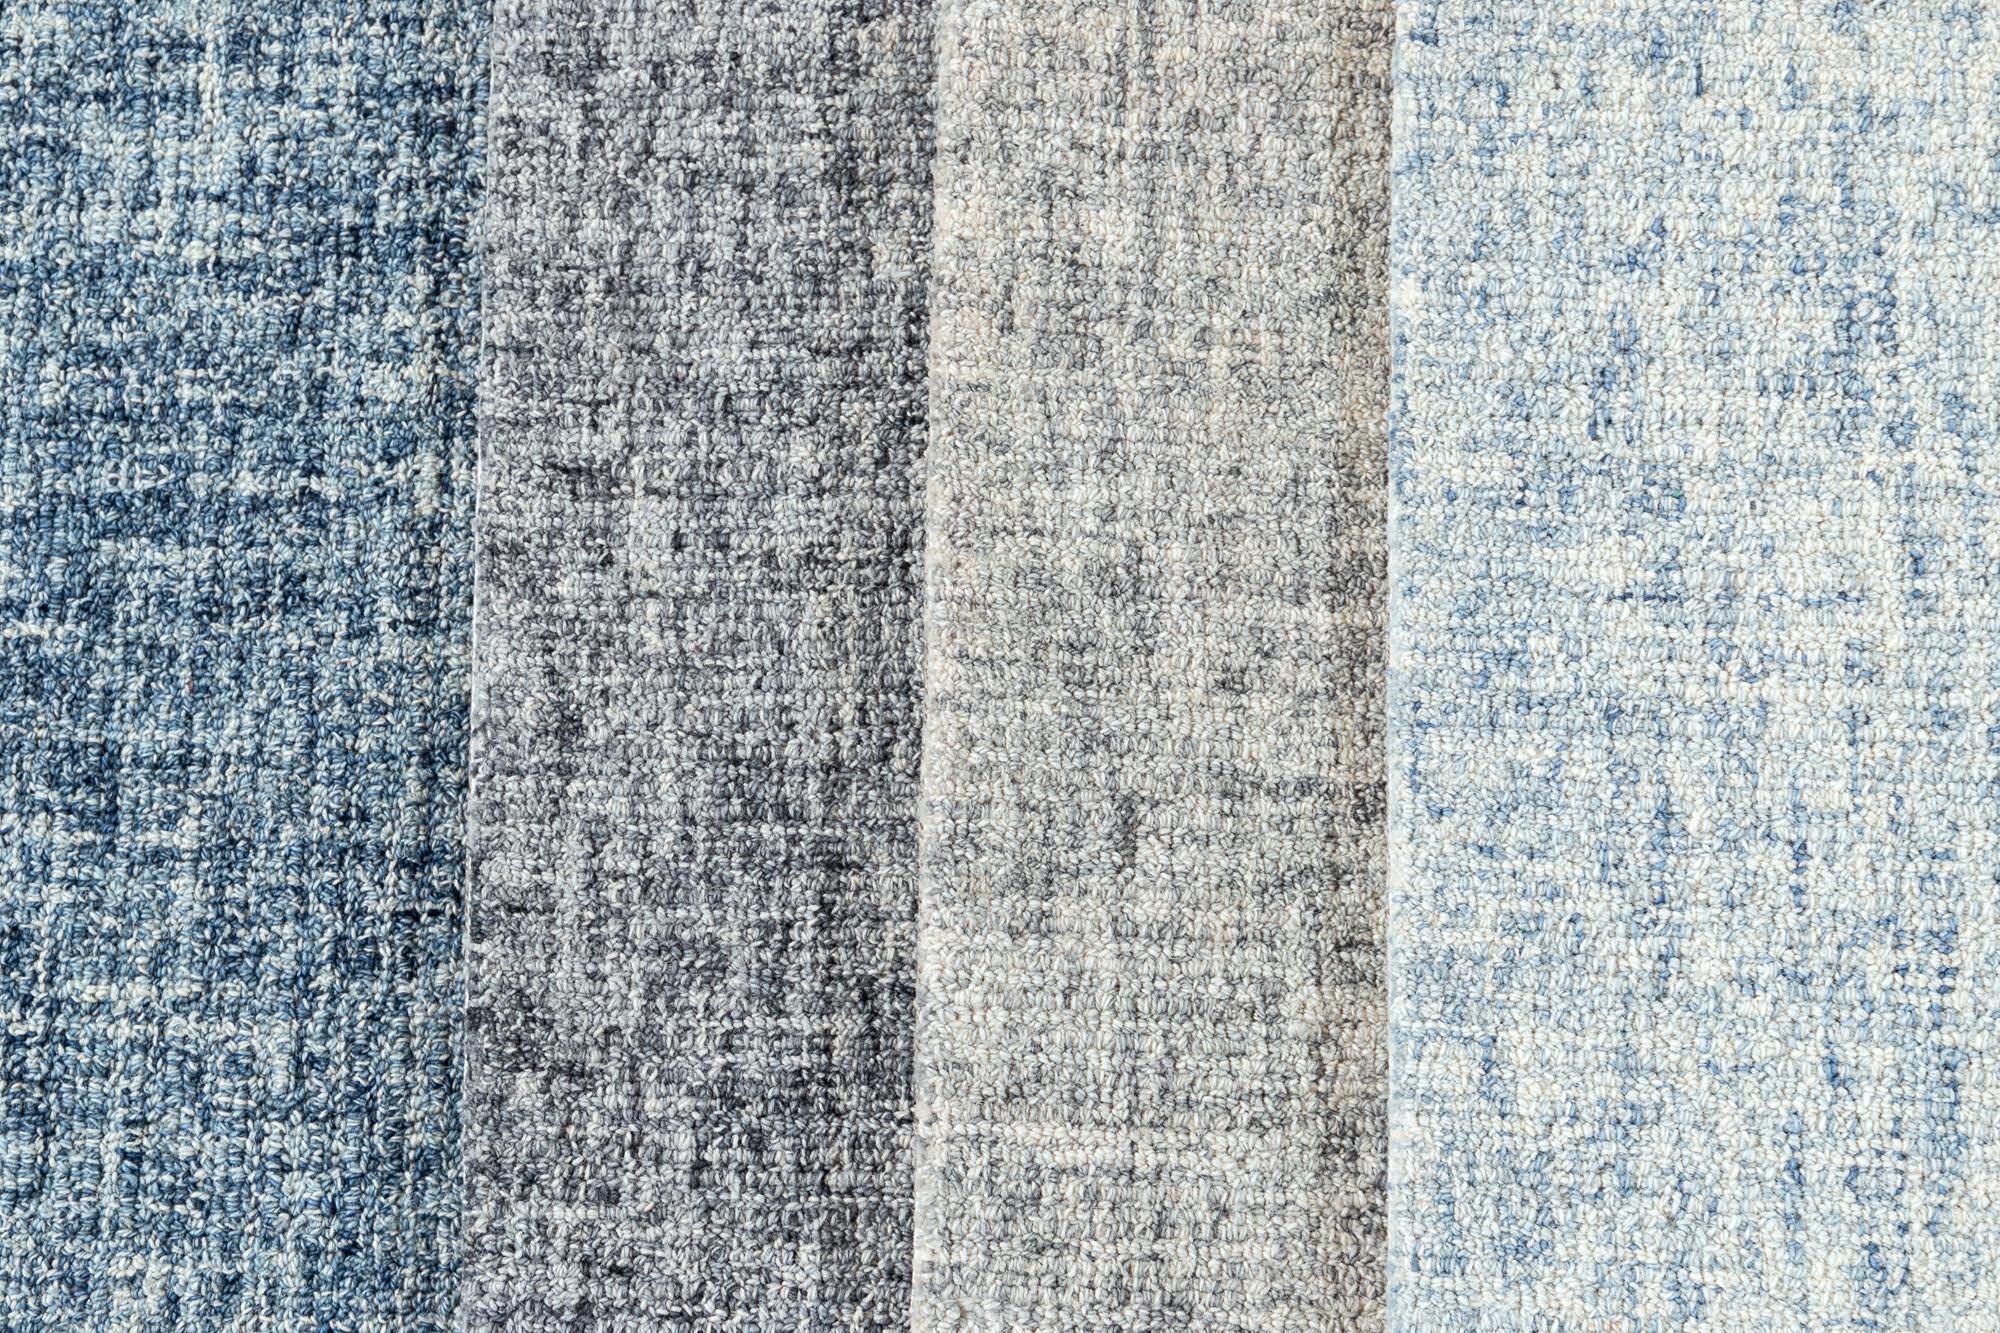 Tufted wool custom rug. Custom sizes and colors made-to-order.
 
Collection: Easton 
Material: Wool 
Lead time: Approx. 15-20 weeks available 
Colors: 20+ shades and styles 
Made in India.
Price listed is for an 8' x 10' rug.